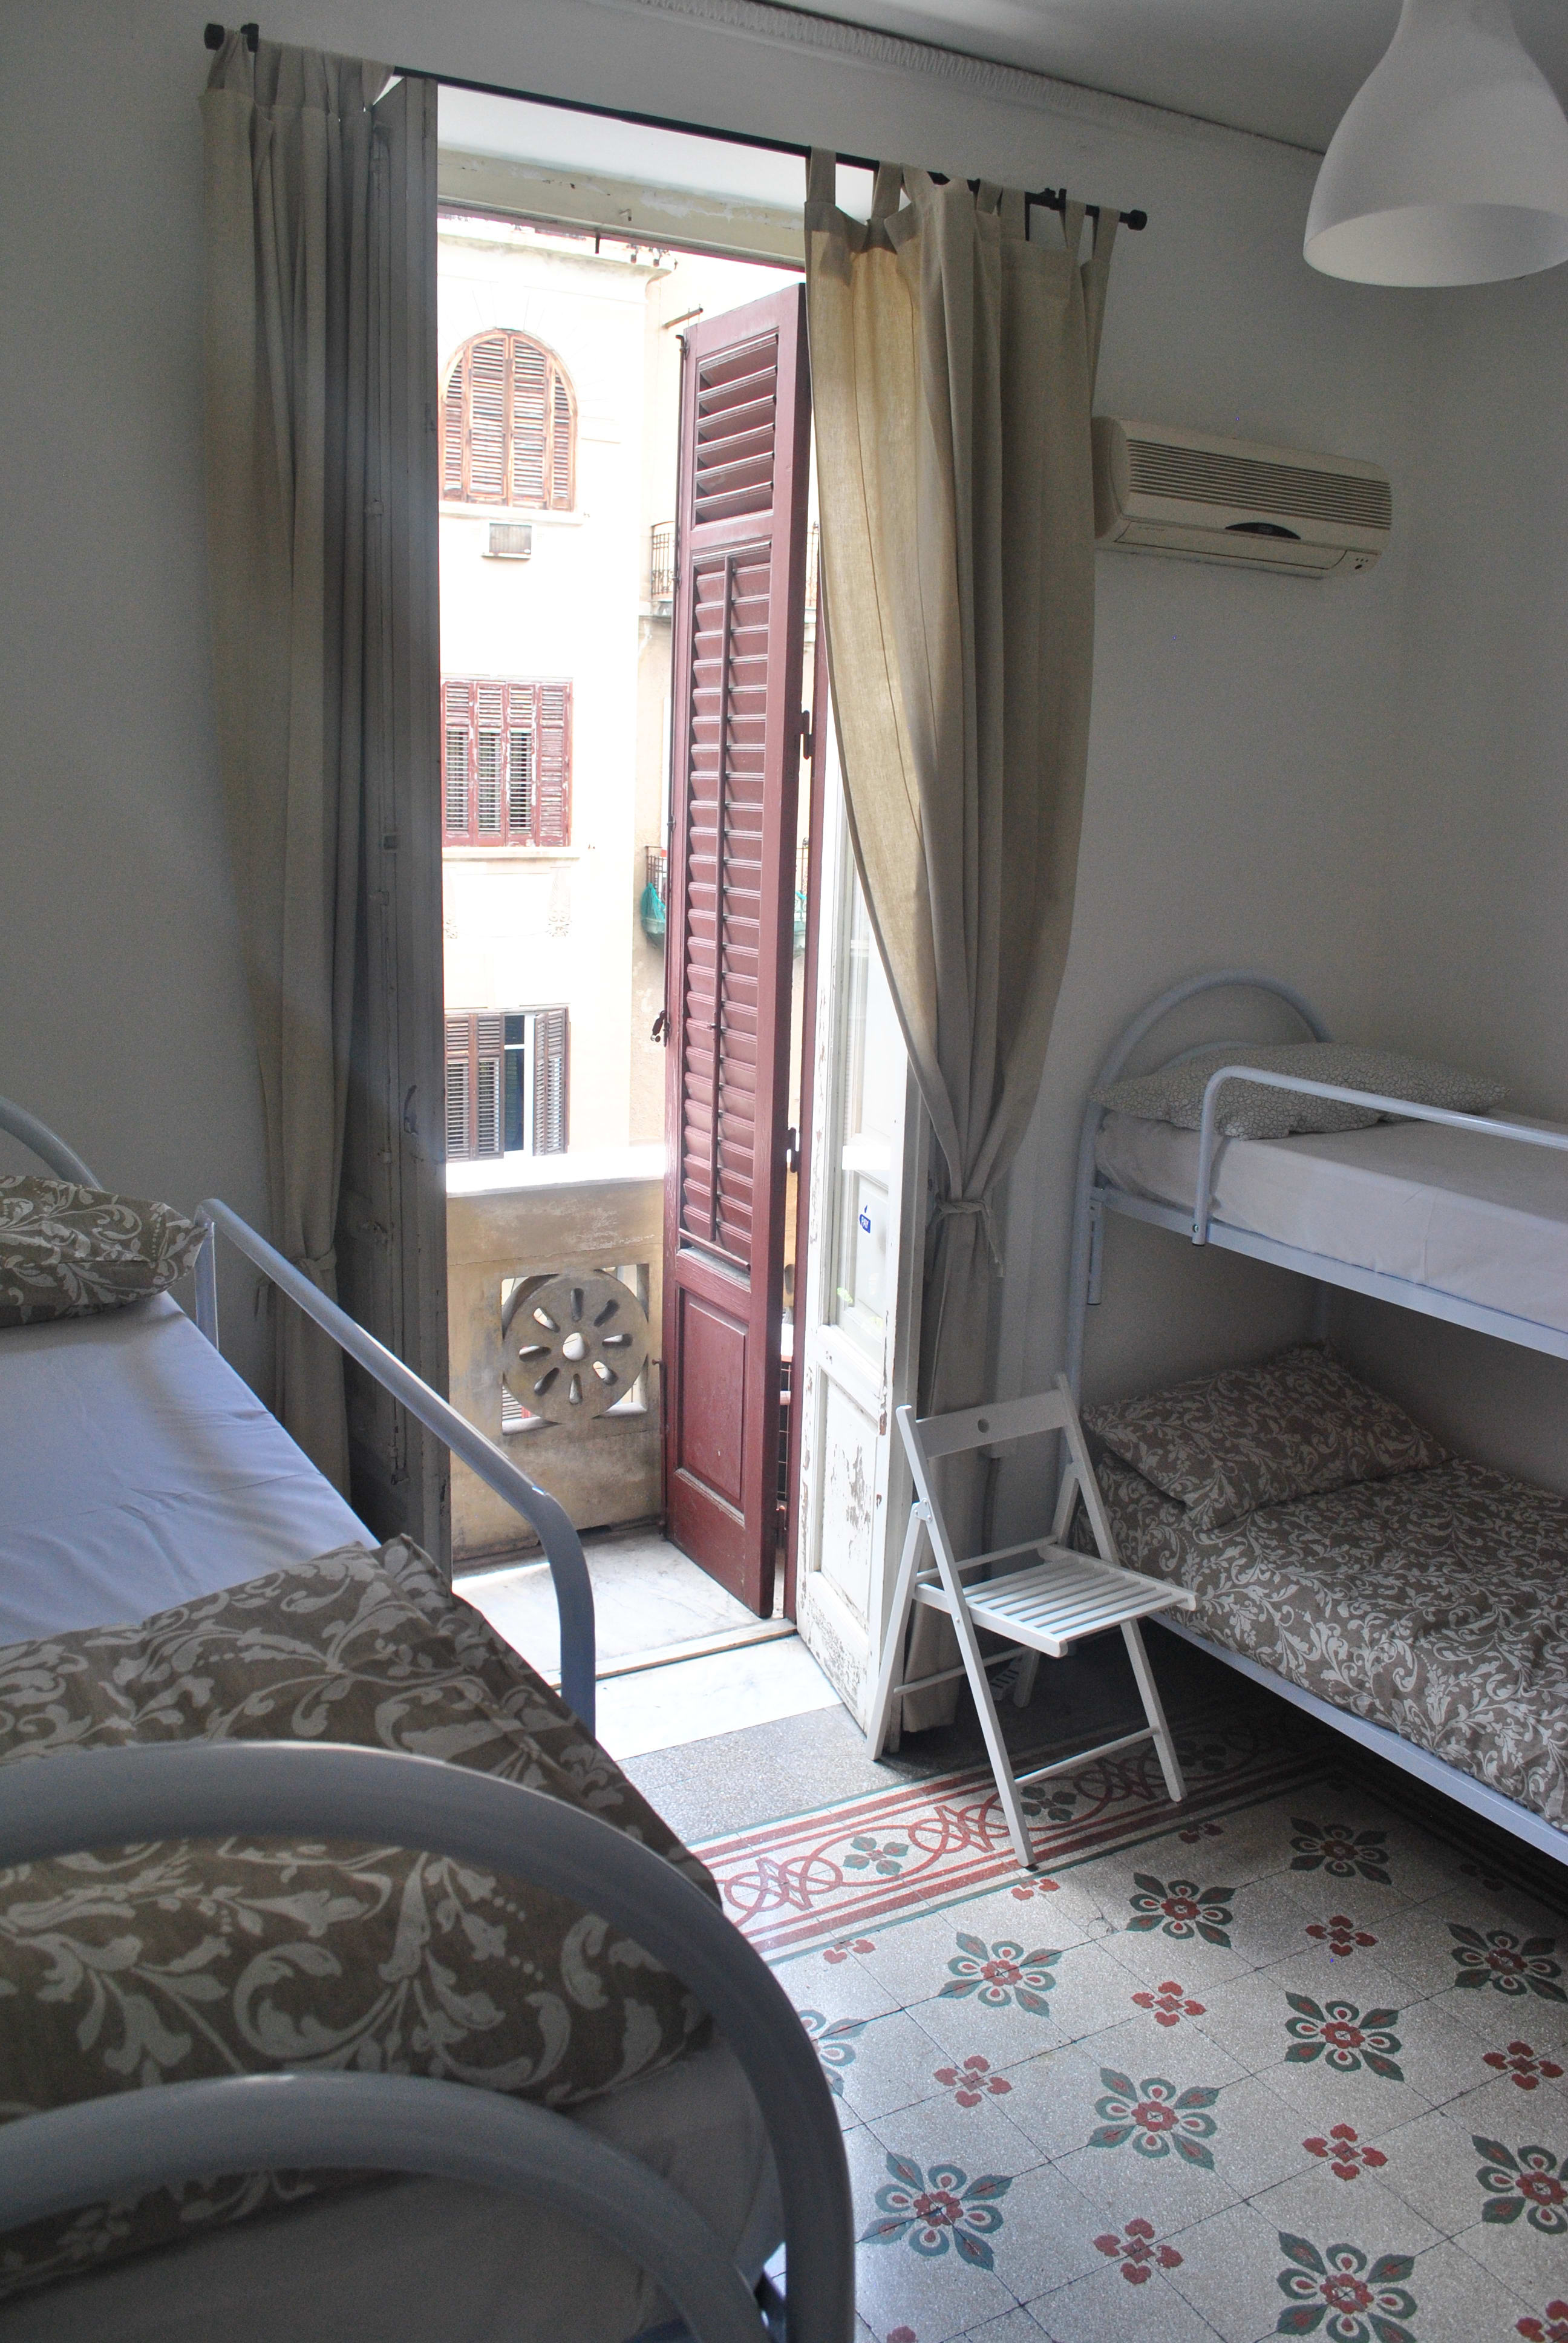 Sunrise Hostel Rooms Palermo 2021 Prices Reviews Hostelworld